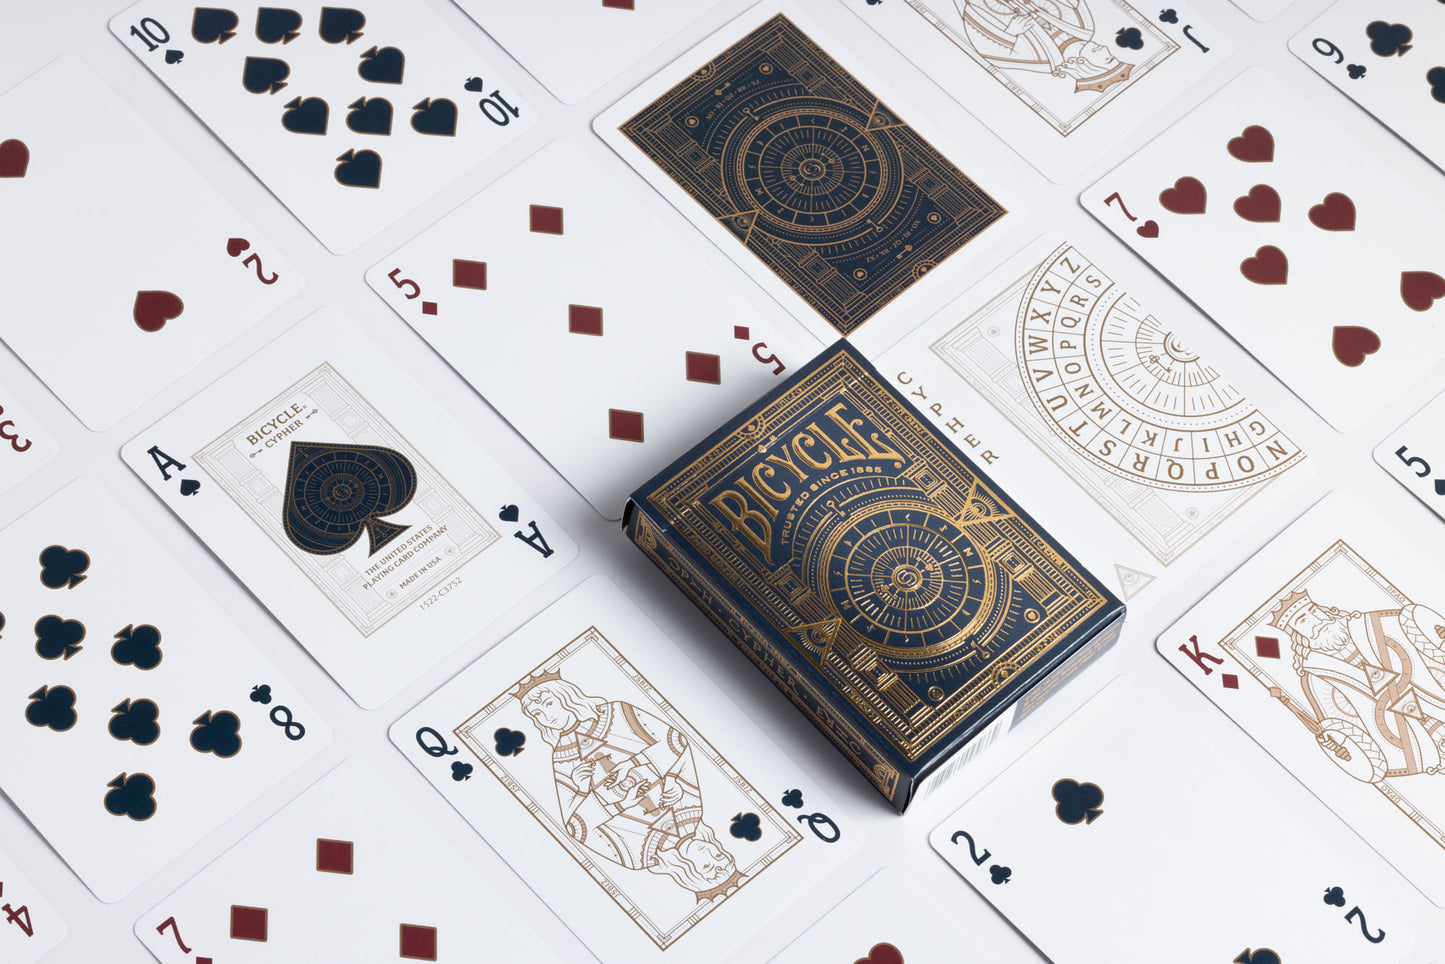 Bicycle Playing Cards: Cypher